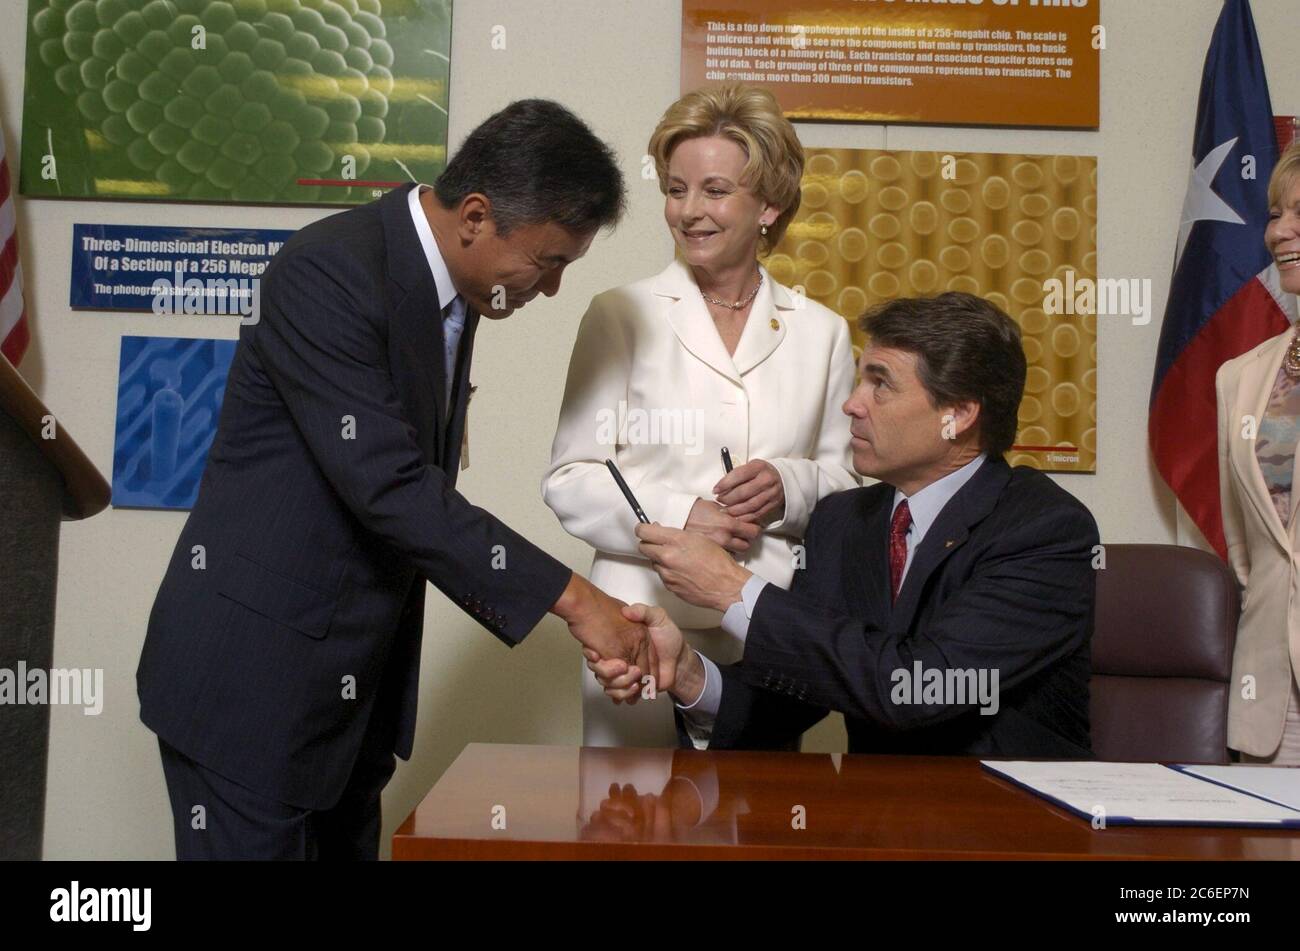 Austin, Texas USA, June 13, 2005:  Texas Governor Rick Perry (center, seated) signs a bill that stimulates investment in the Texas high-tech industry. The bill-signing takes place at the $1.3-billion Samsung semiconductor fabrication plant in suburban north Austin. Left to right are plant manager H.K. Park, State Rep. Jeanne Morrison, and Gov. Perry. ©Bob Daemmrich Stock Photo